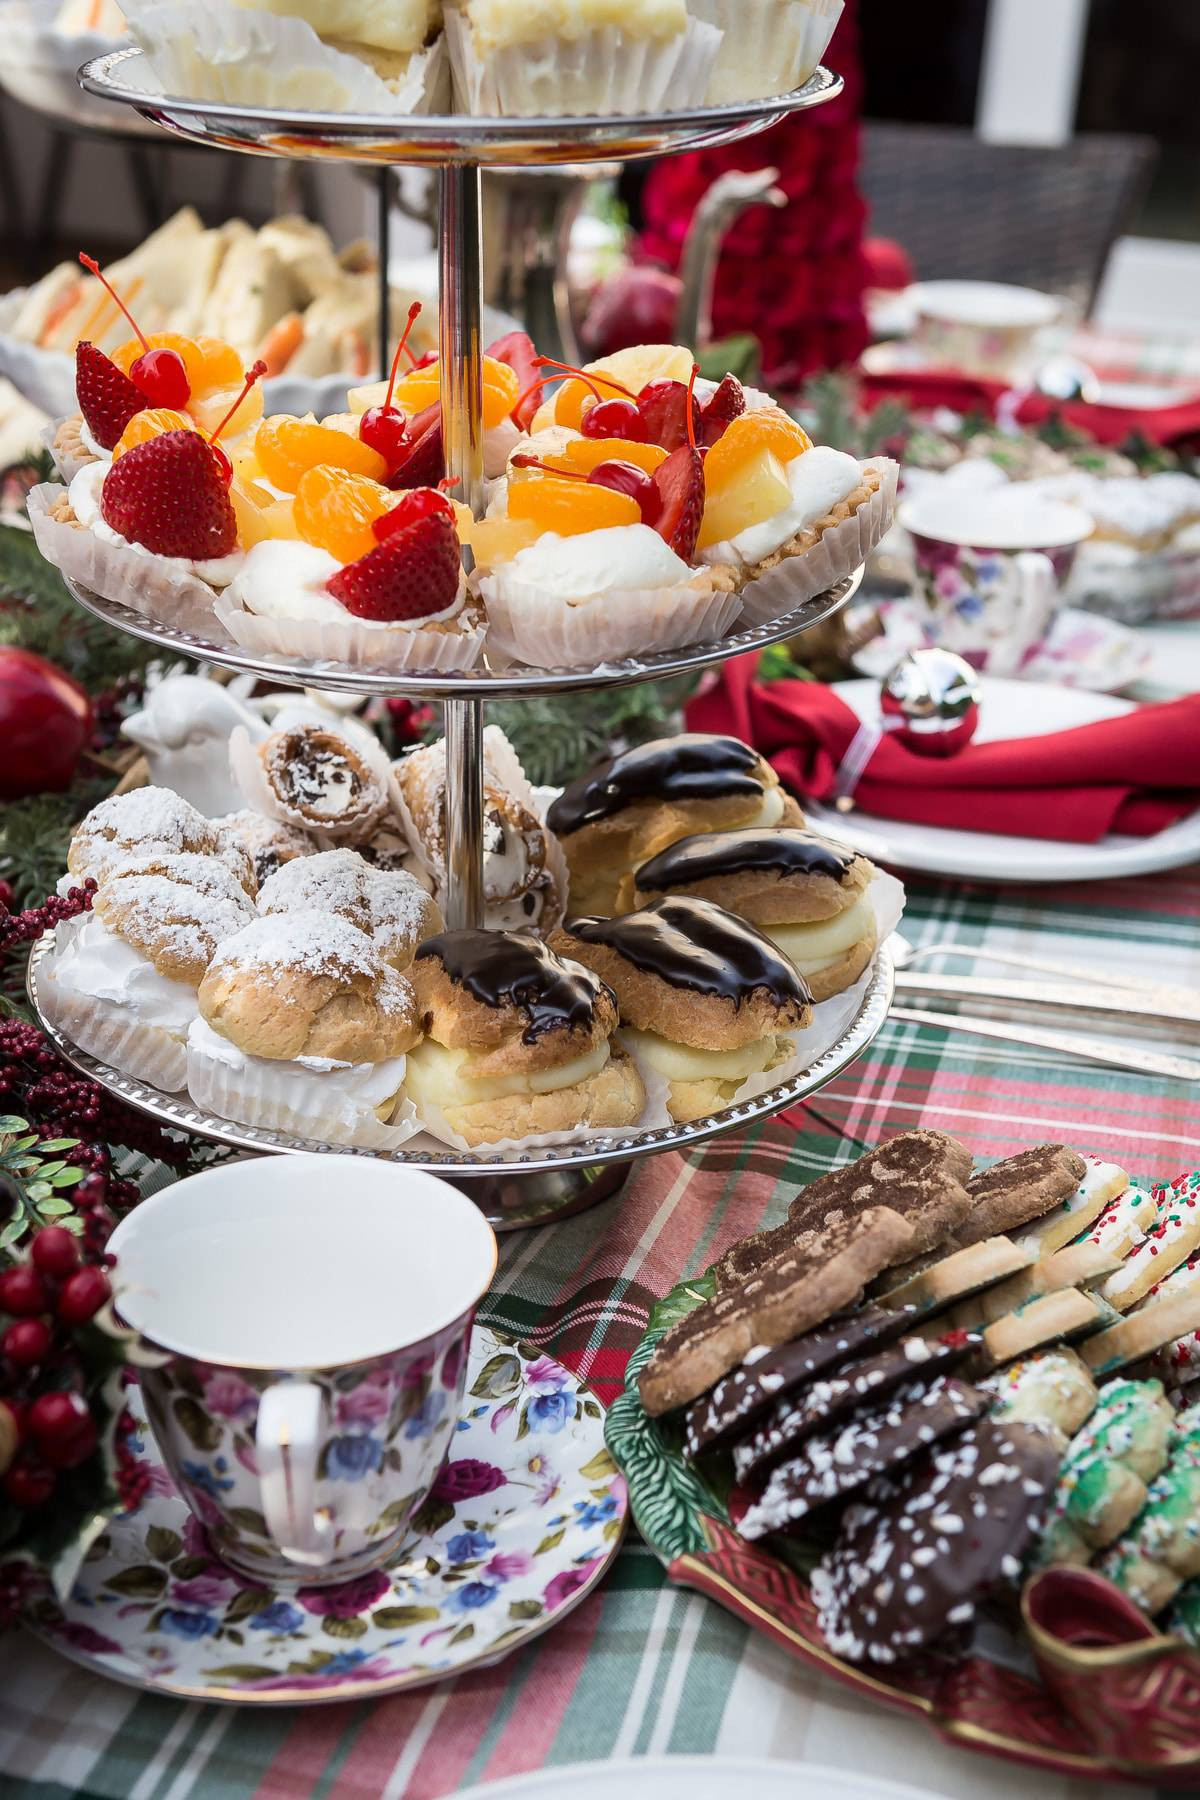 Tea Party Dessert Ideas
 How To Host a Perfect Christmas Tea Party Foodness Gracious